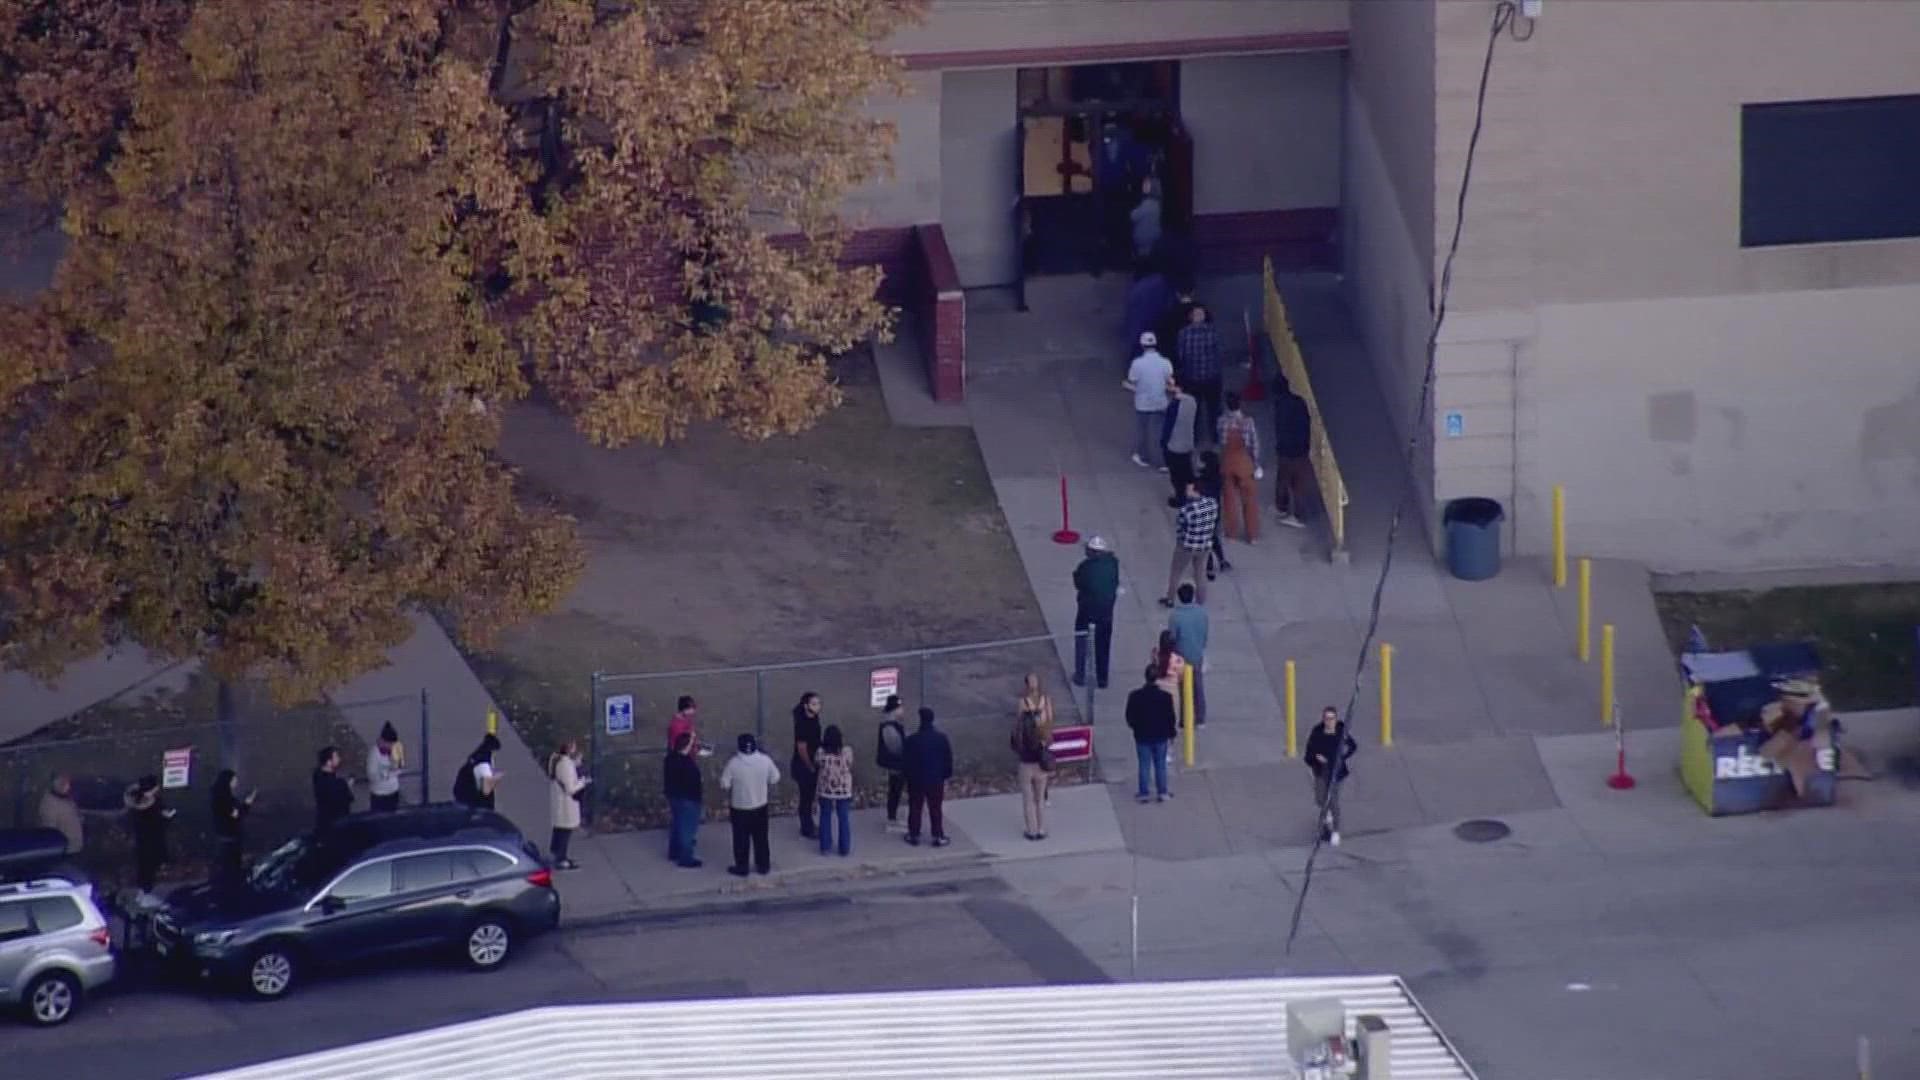 As of Tuesday afternoon, the Colorado Secretary of State's Office said 1.86 million ballots had been returned across the state.